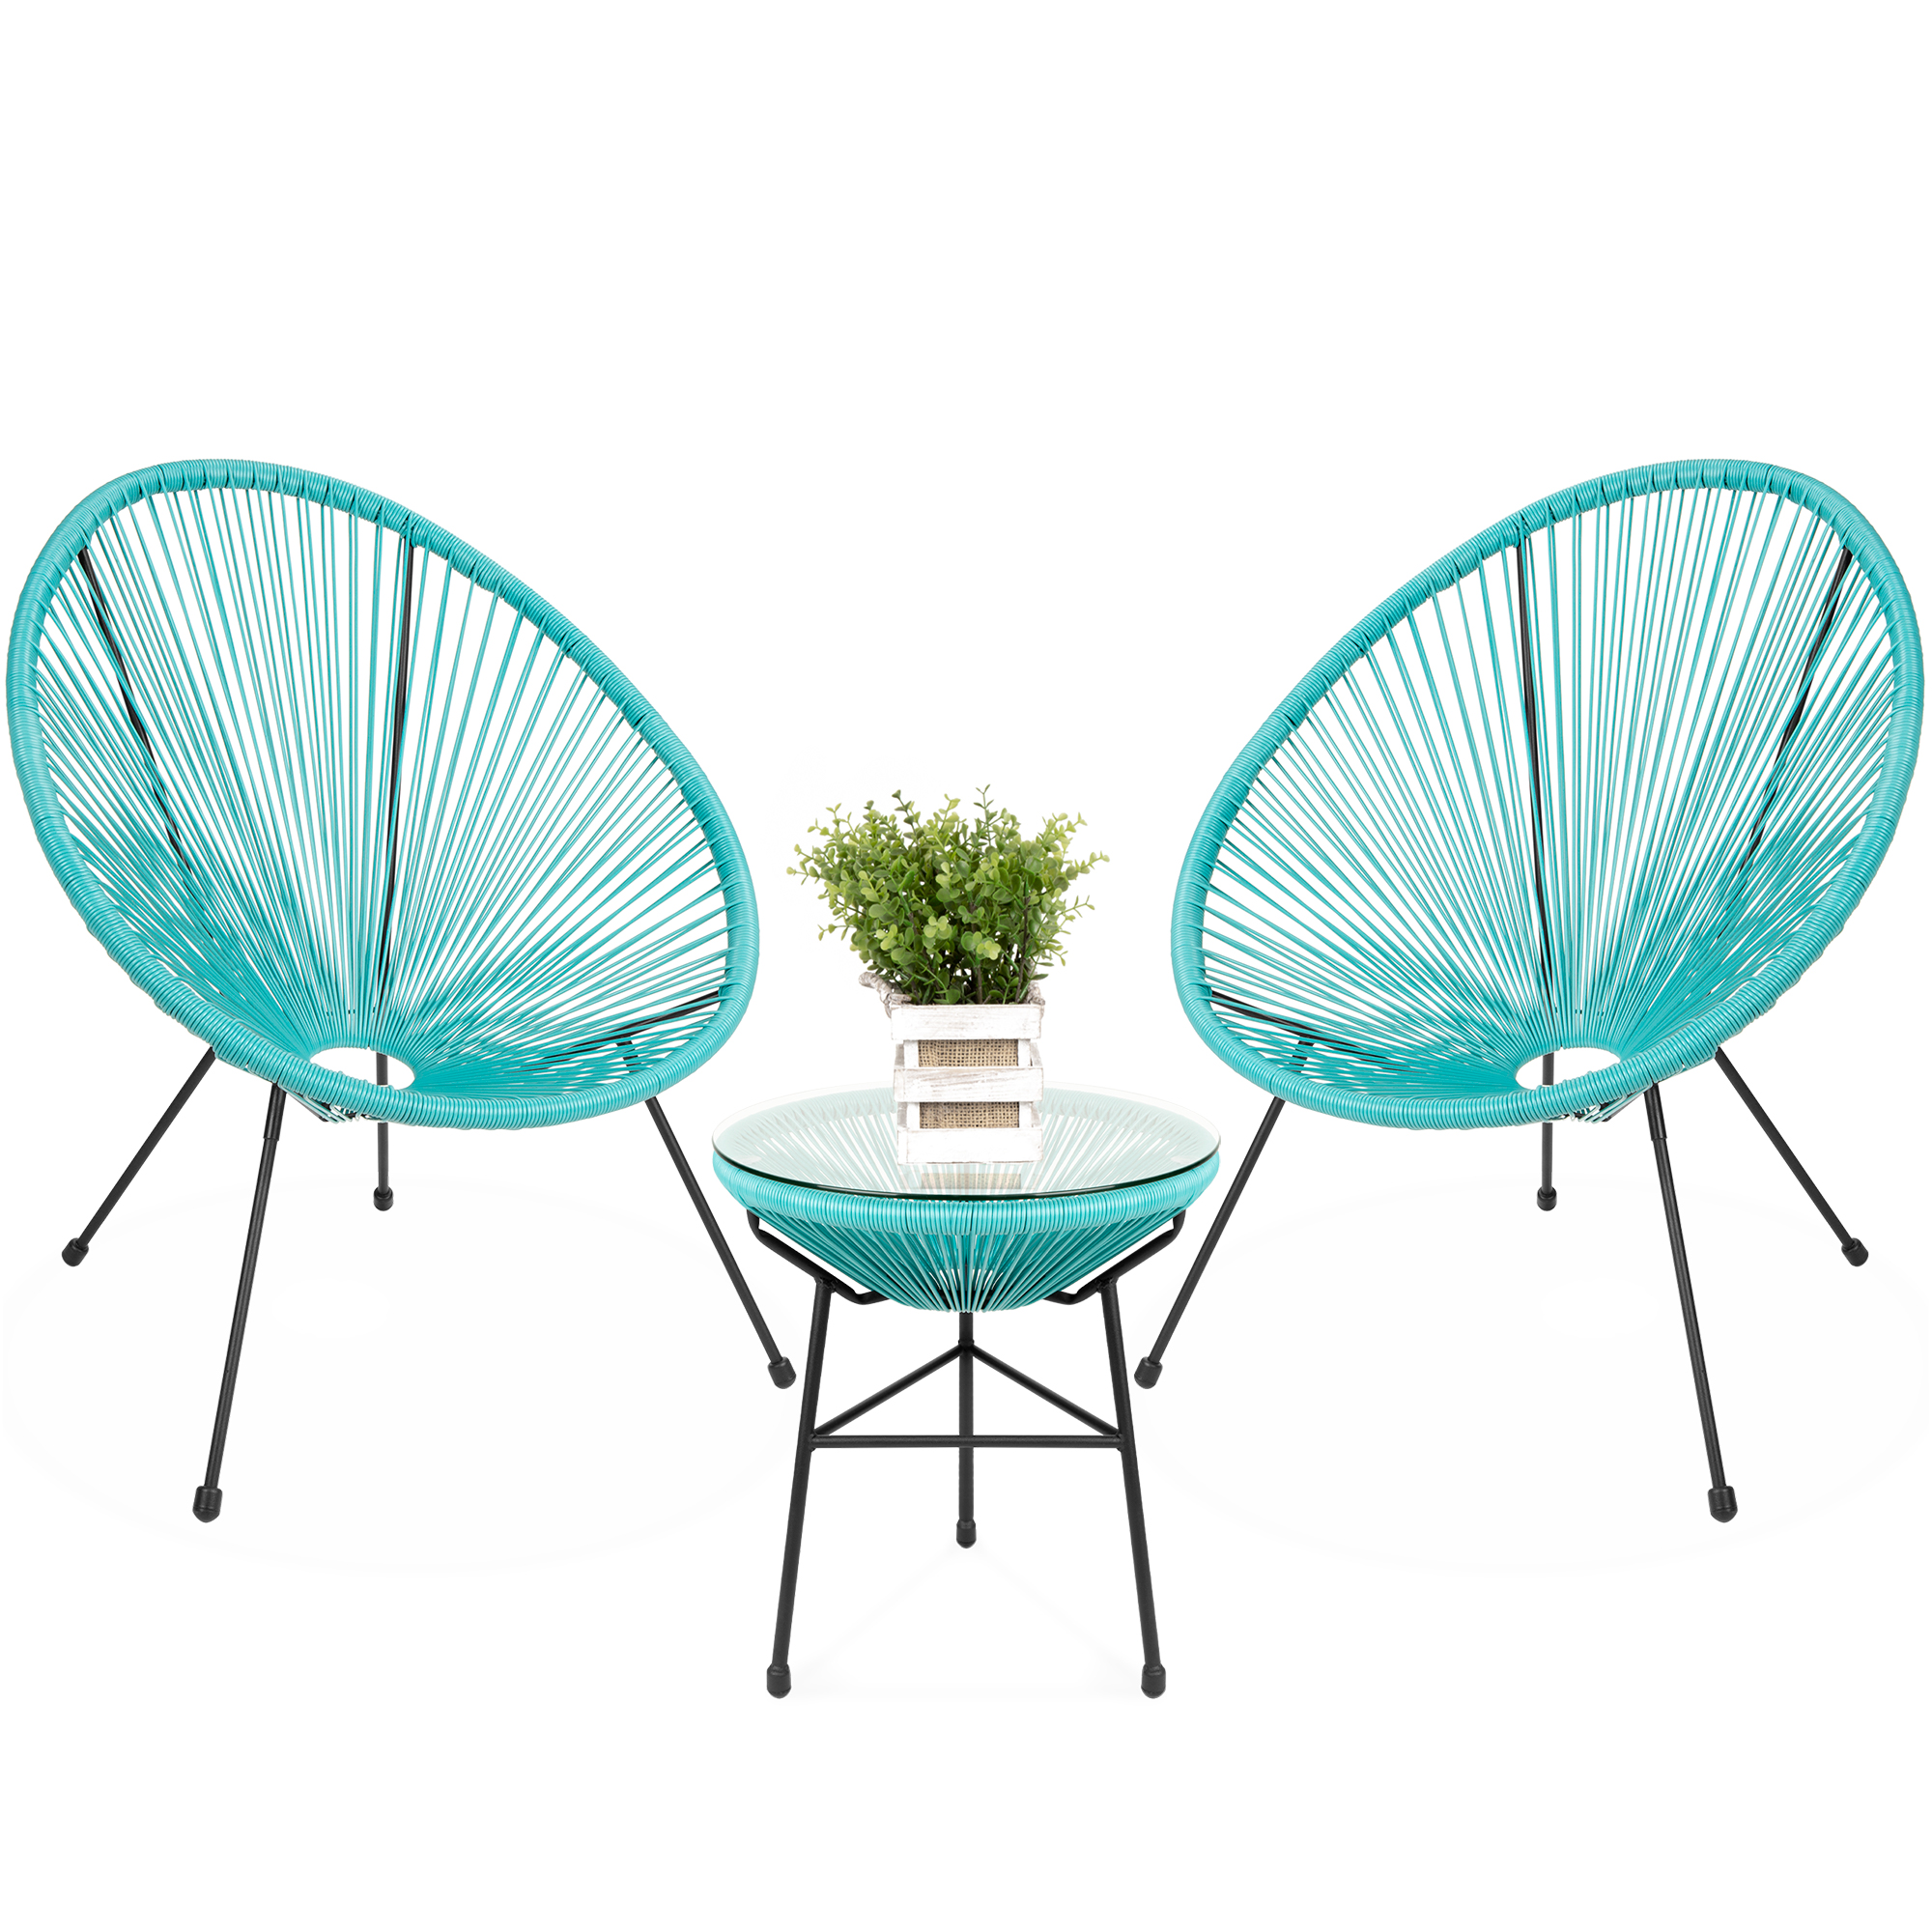 Best Choice Products 3-Piece All-Weather Patio Acapulco Bistro Furniture Set w/ Rope, Glass Top Table - Light Blue - image 1 of 7